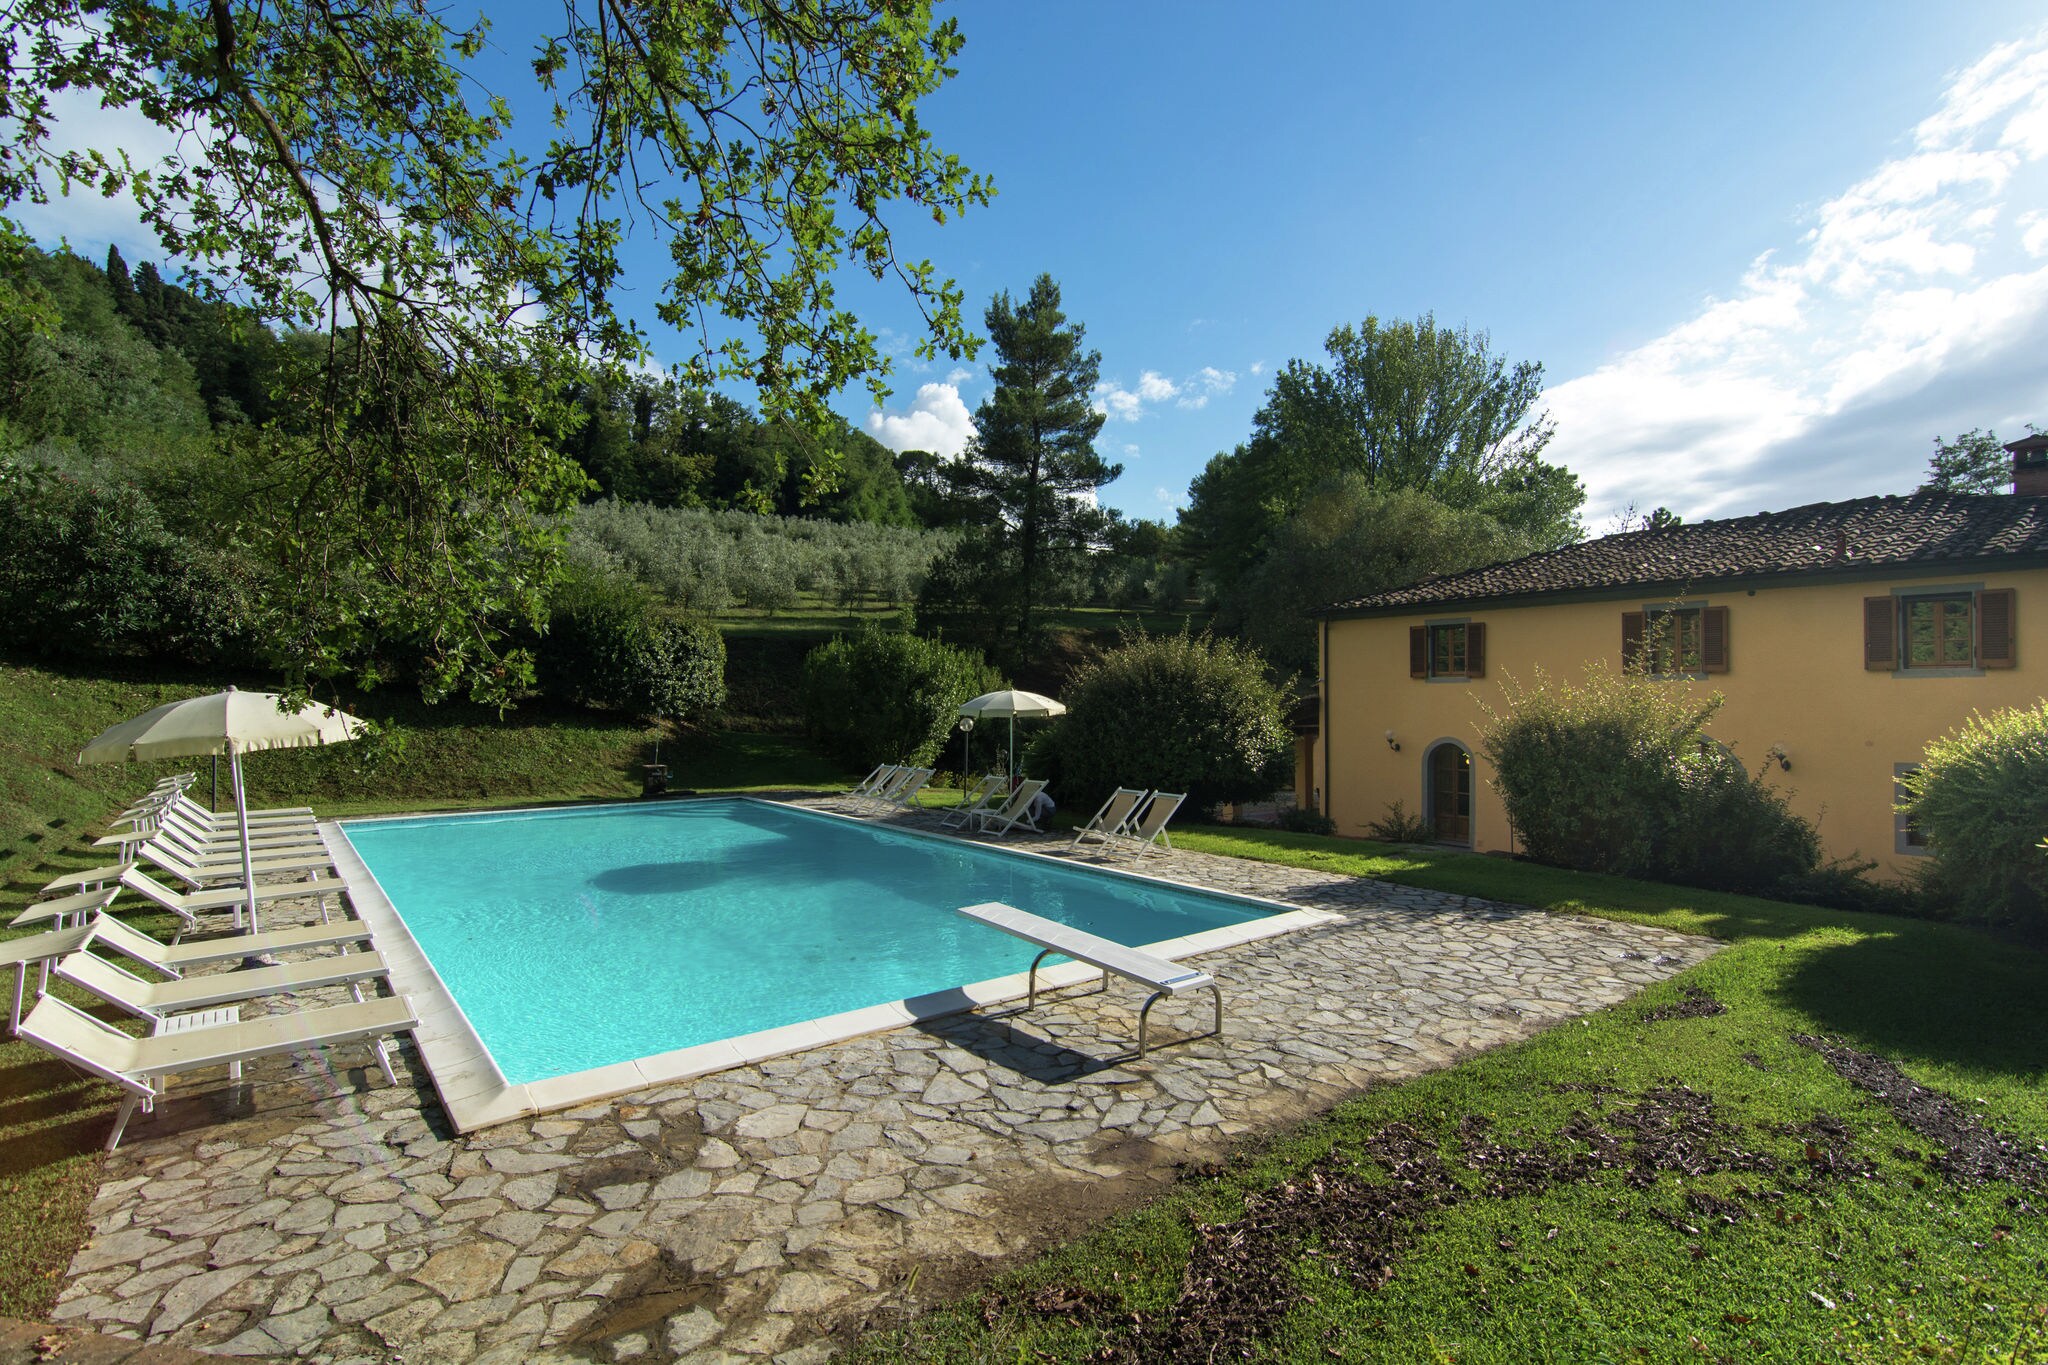 A beautiful Tuscan farmhouse and a large swimming pool and relaxing